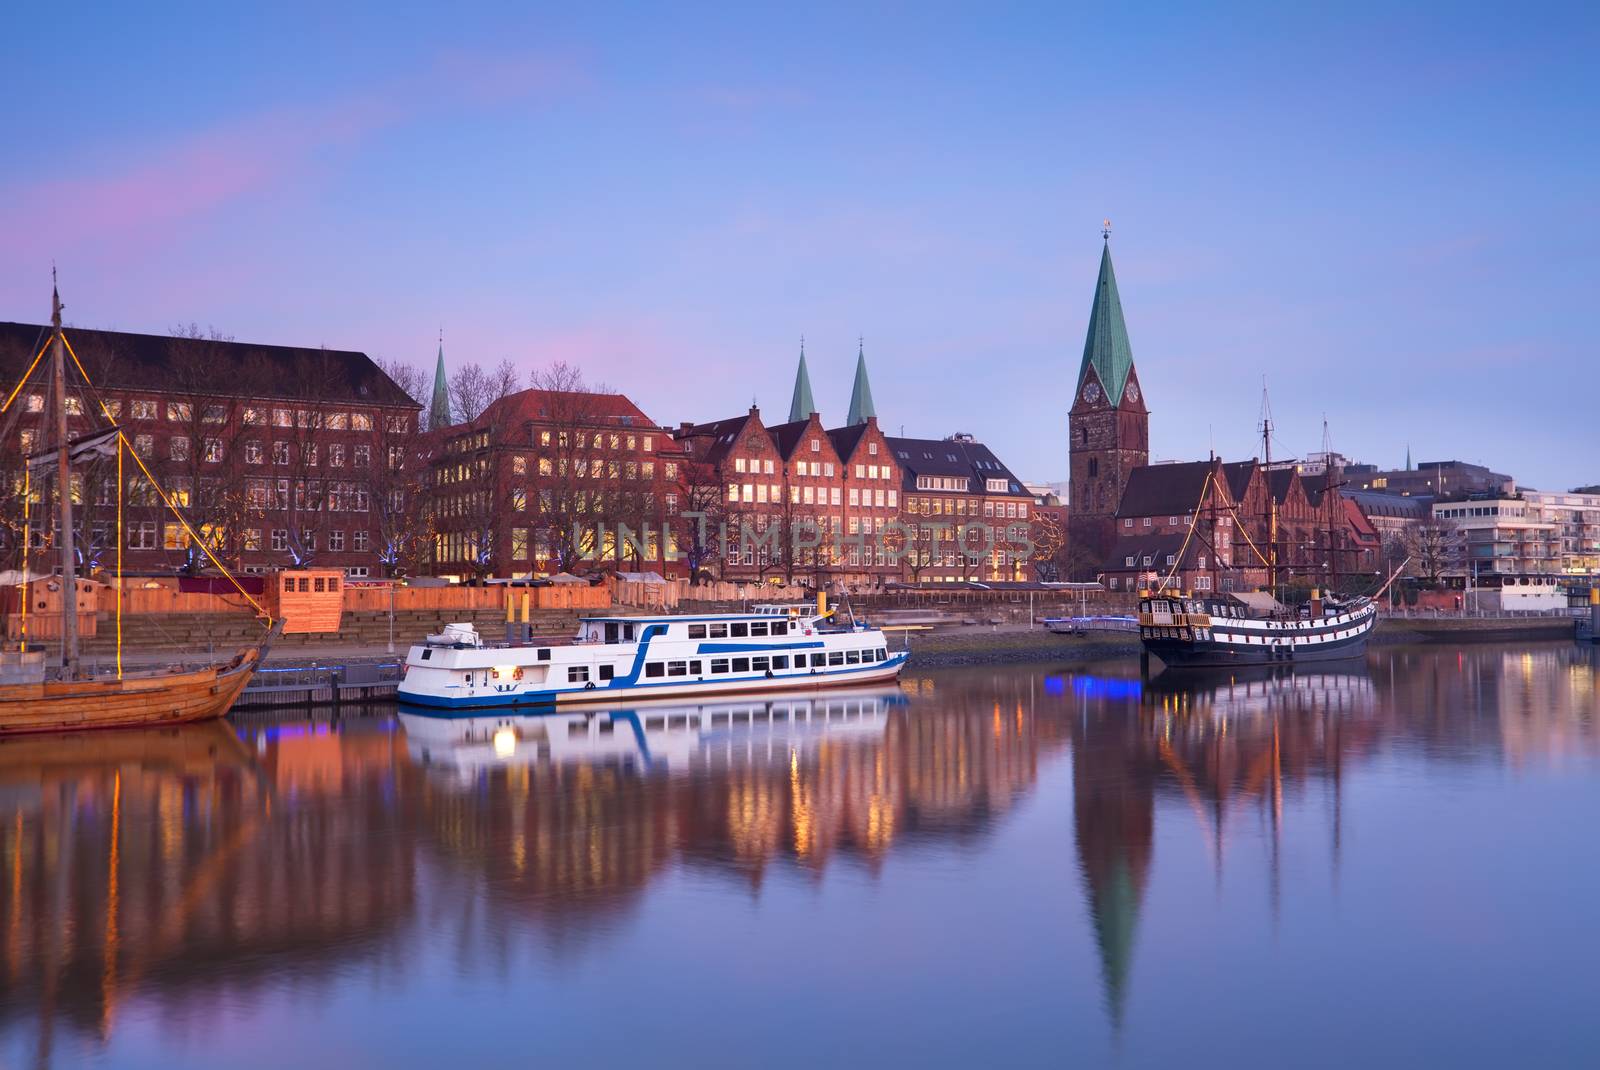 pink sunset over river in Bremen city, Germany